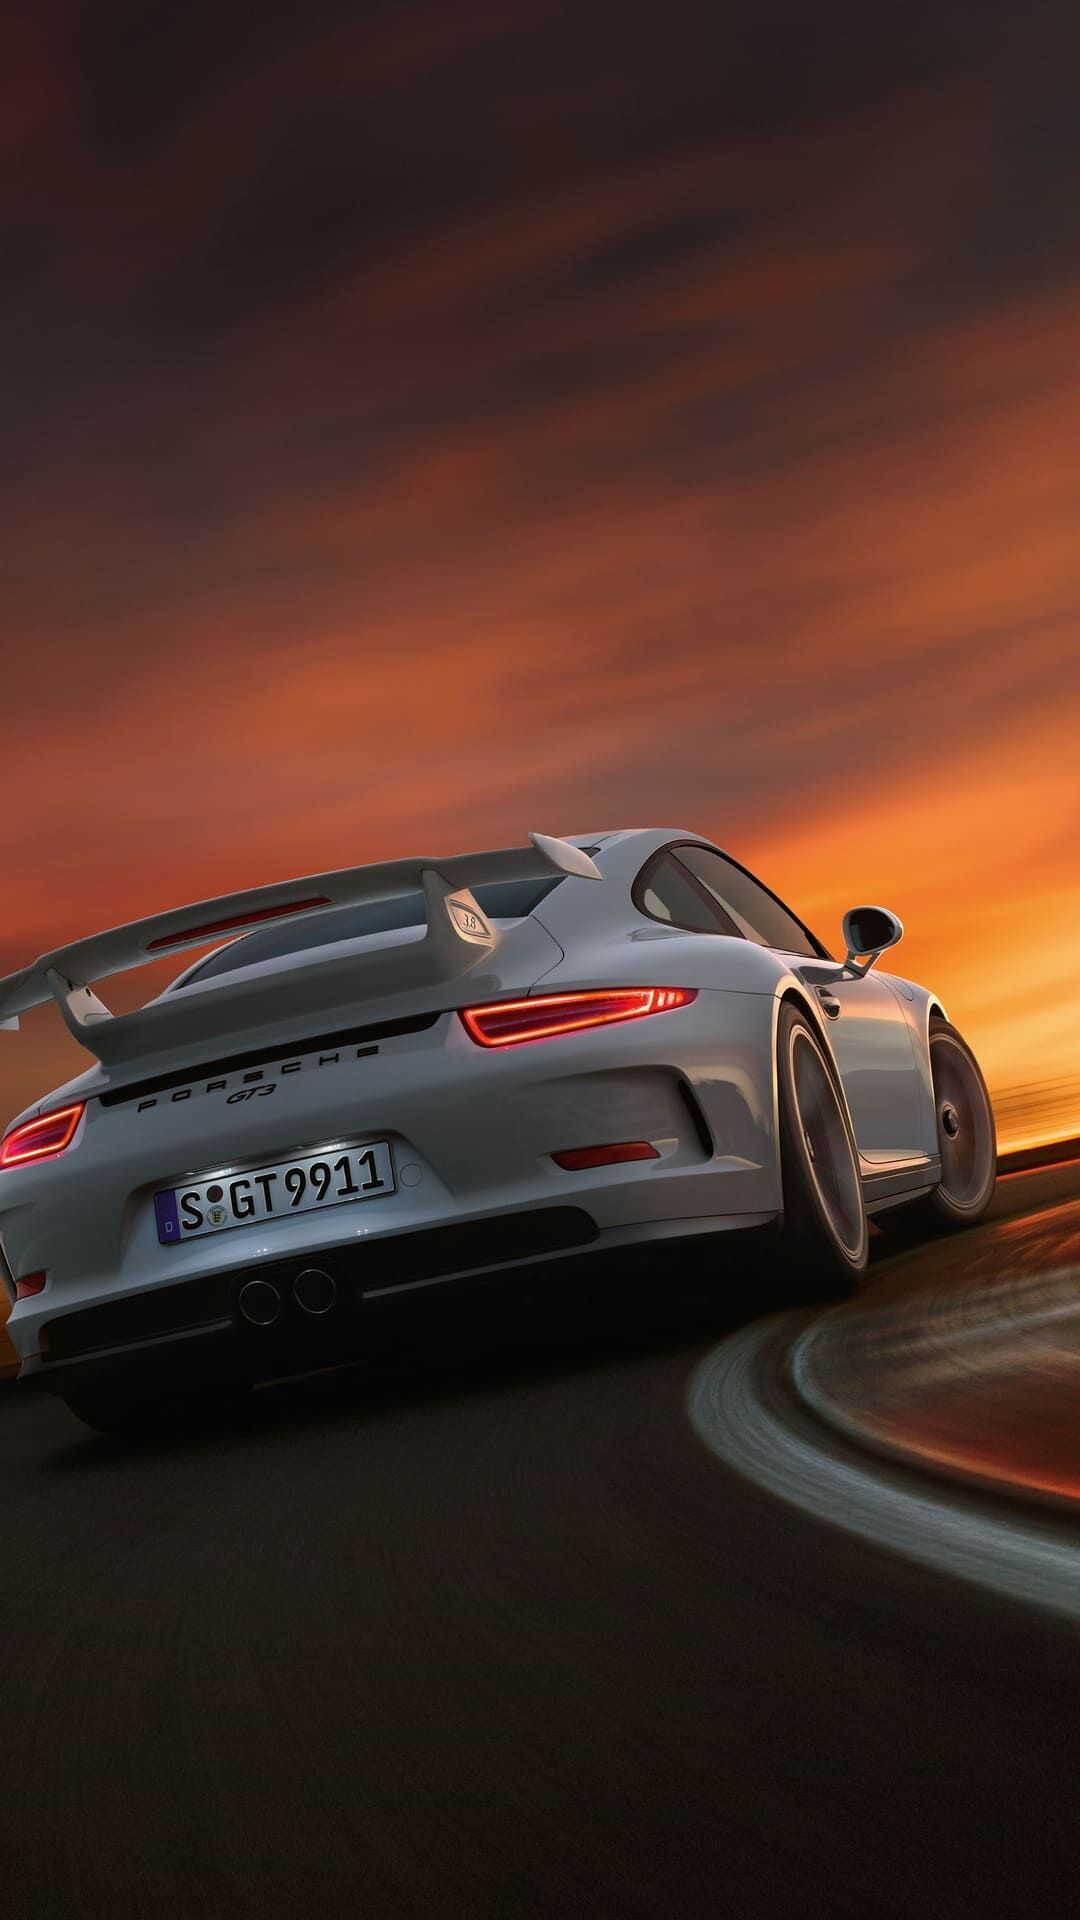 Porsche 911 GT3 wallpapers, Top high-quality, Stunning backgrounds, Free download, 1080x1920 Full HD Phone